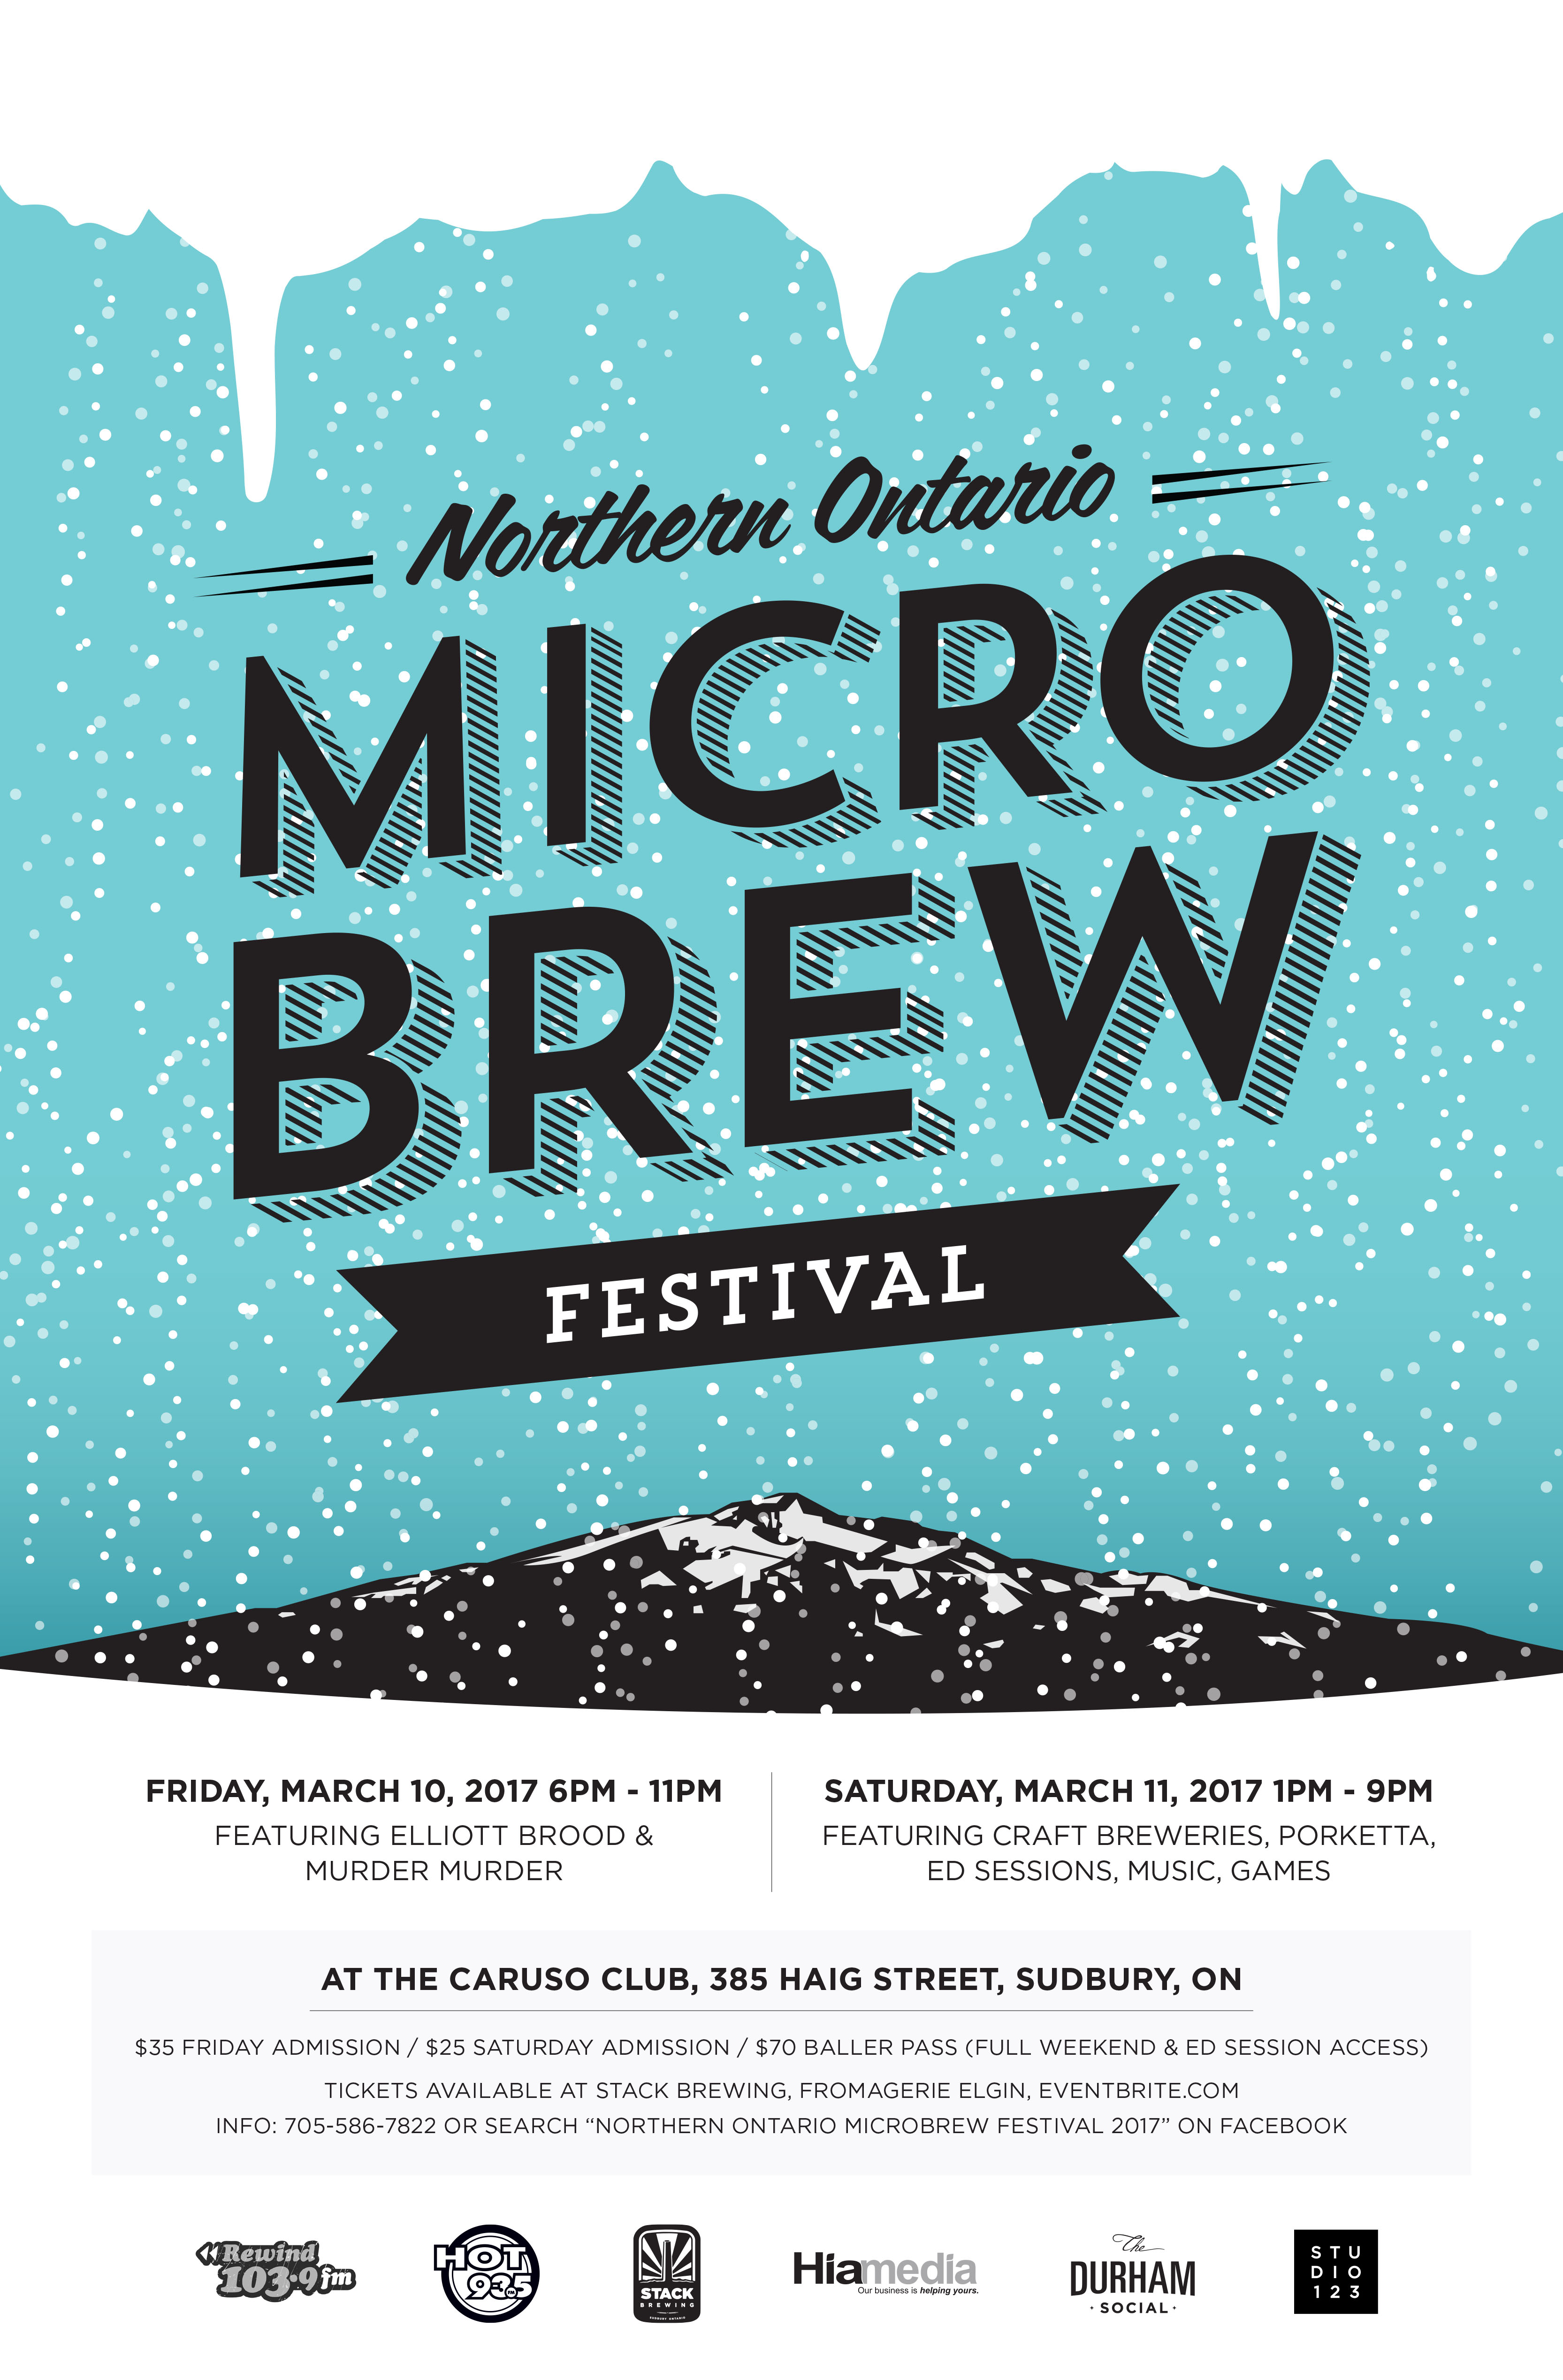 Northern Ontario Microbrew Festival: Two days of delicious craft beer